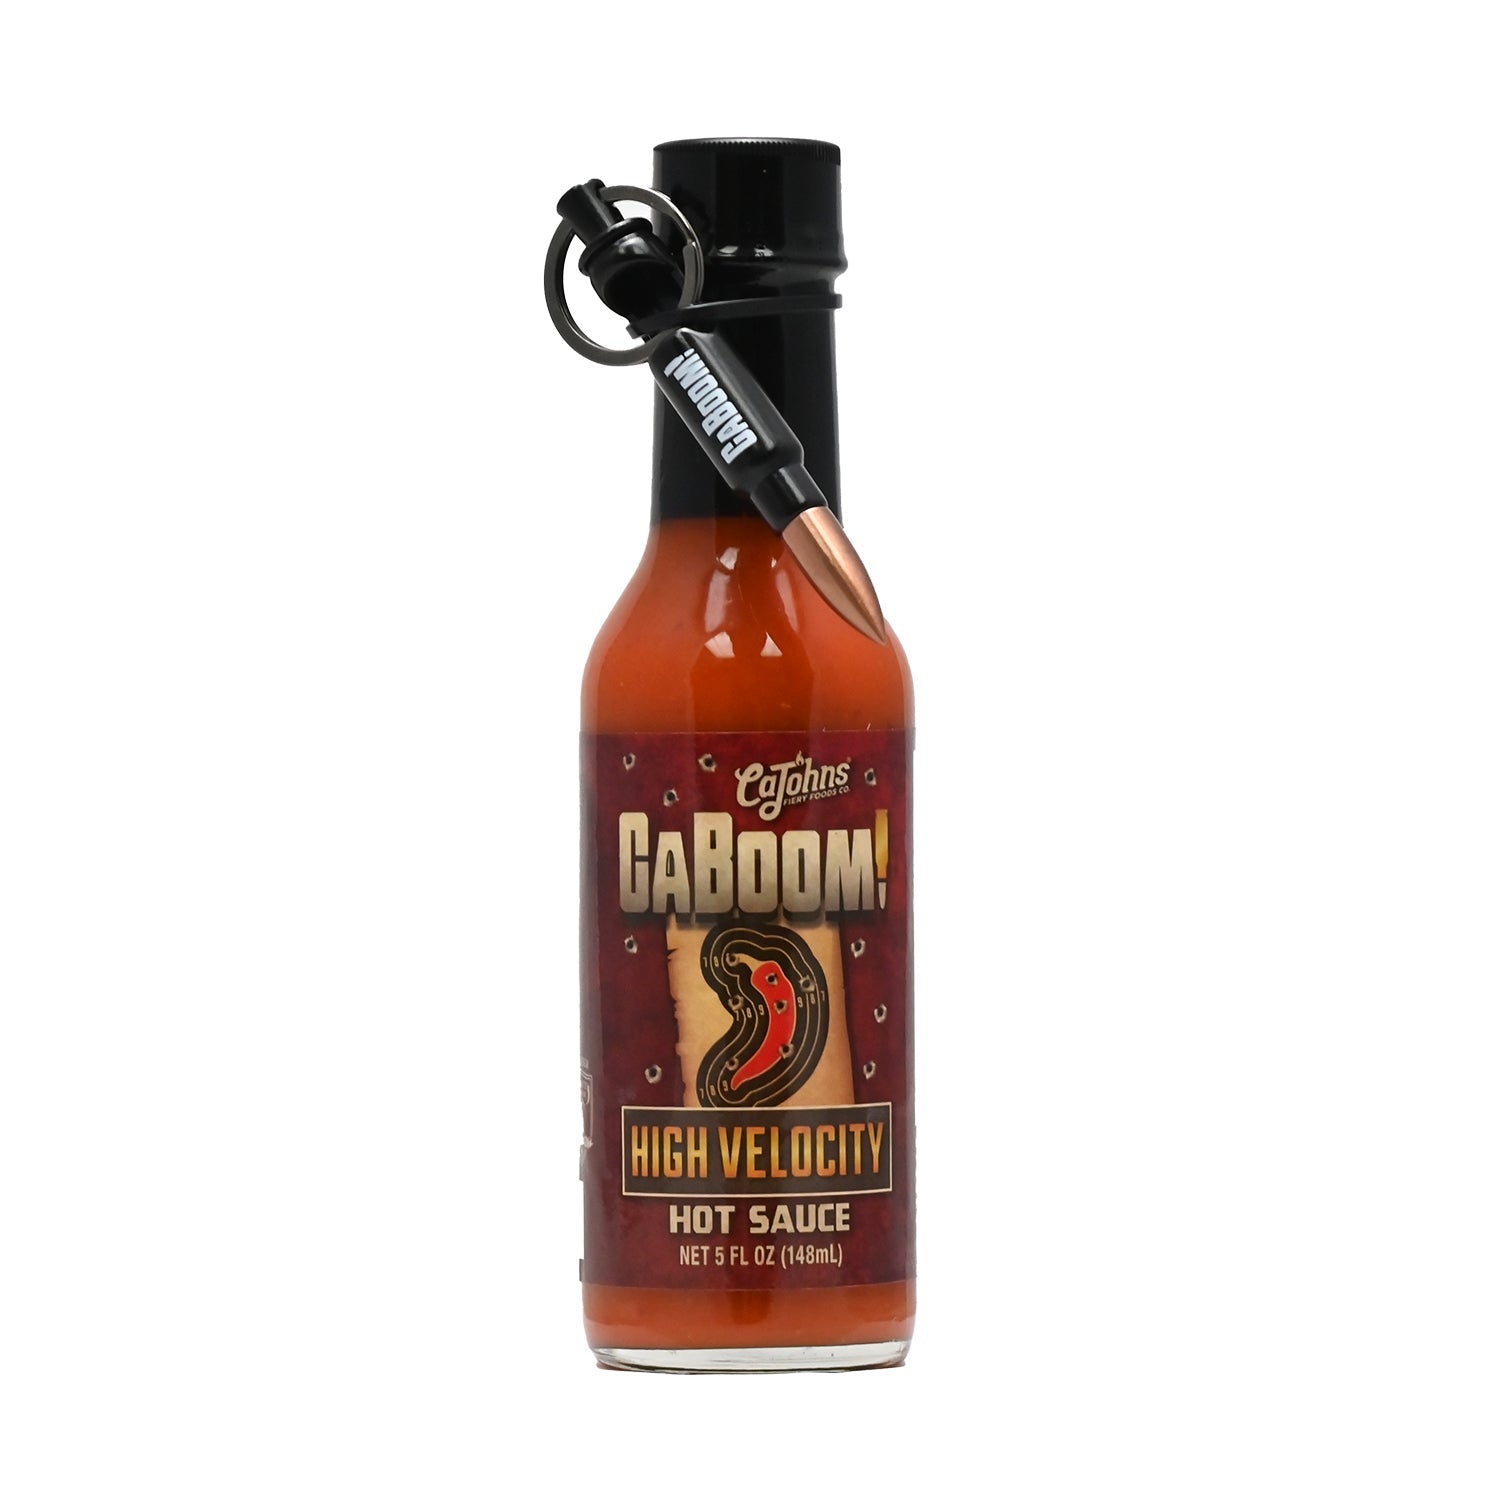 CaBoom! High Velocity Hot Sauce with Bullet Keychain